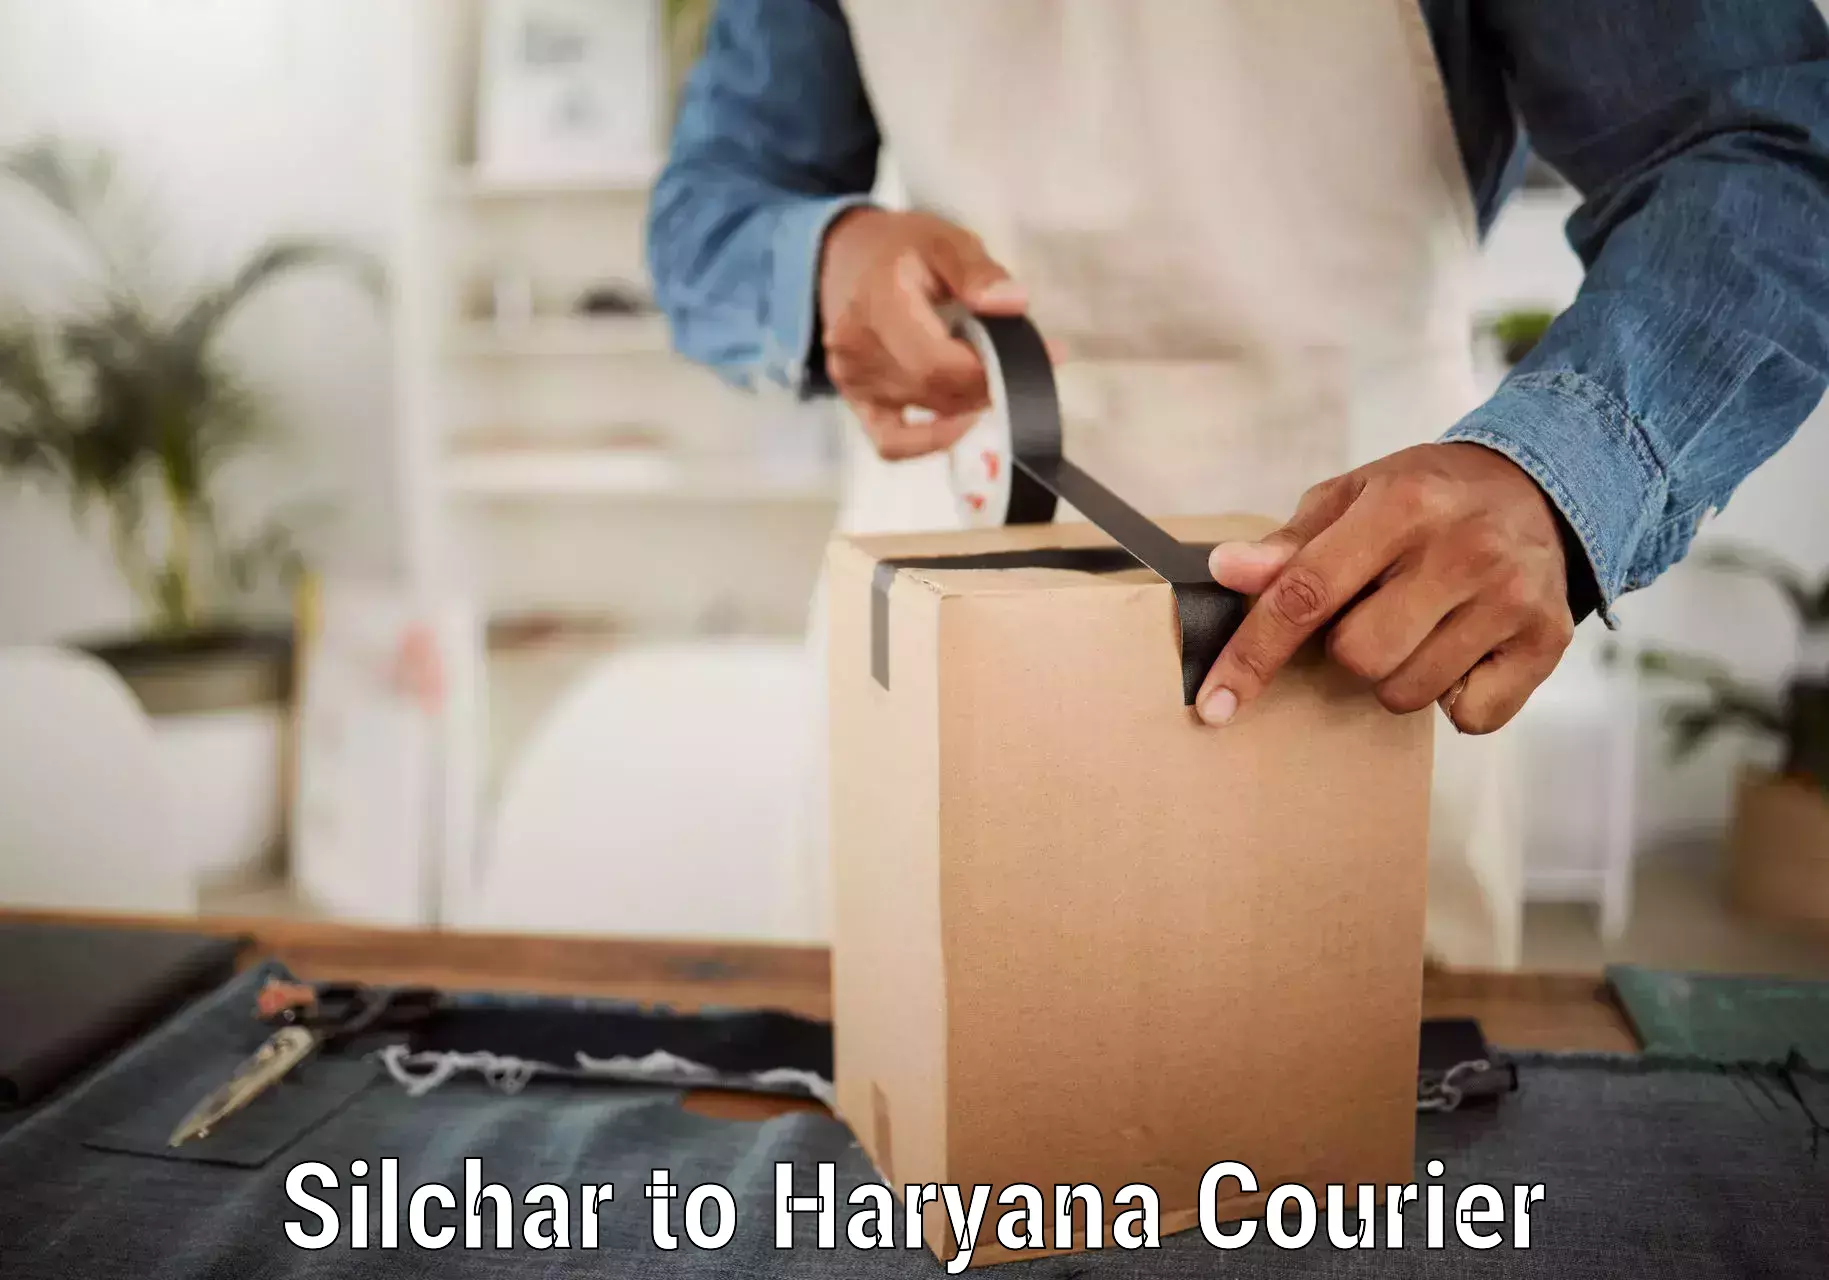 Courier service booking Silchar to Bhiwani